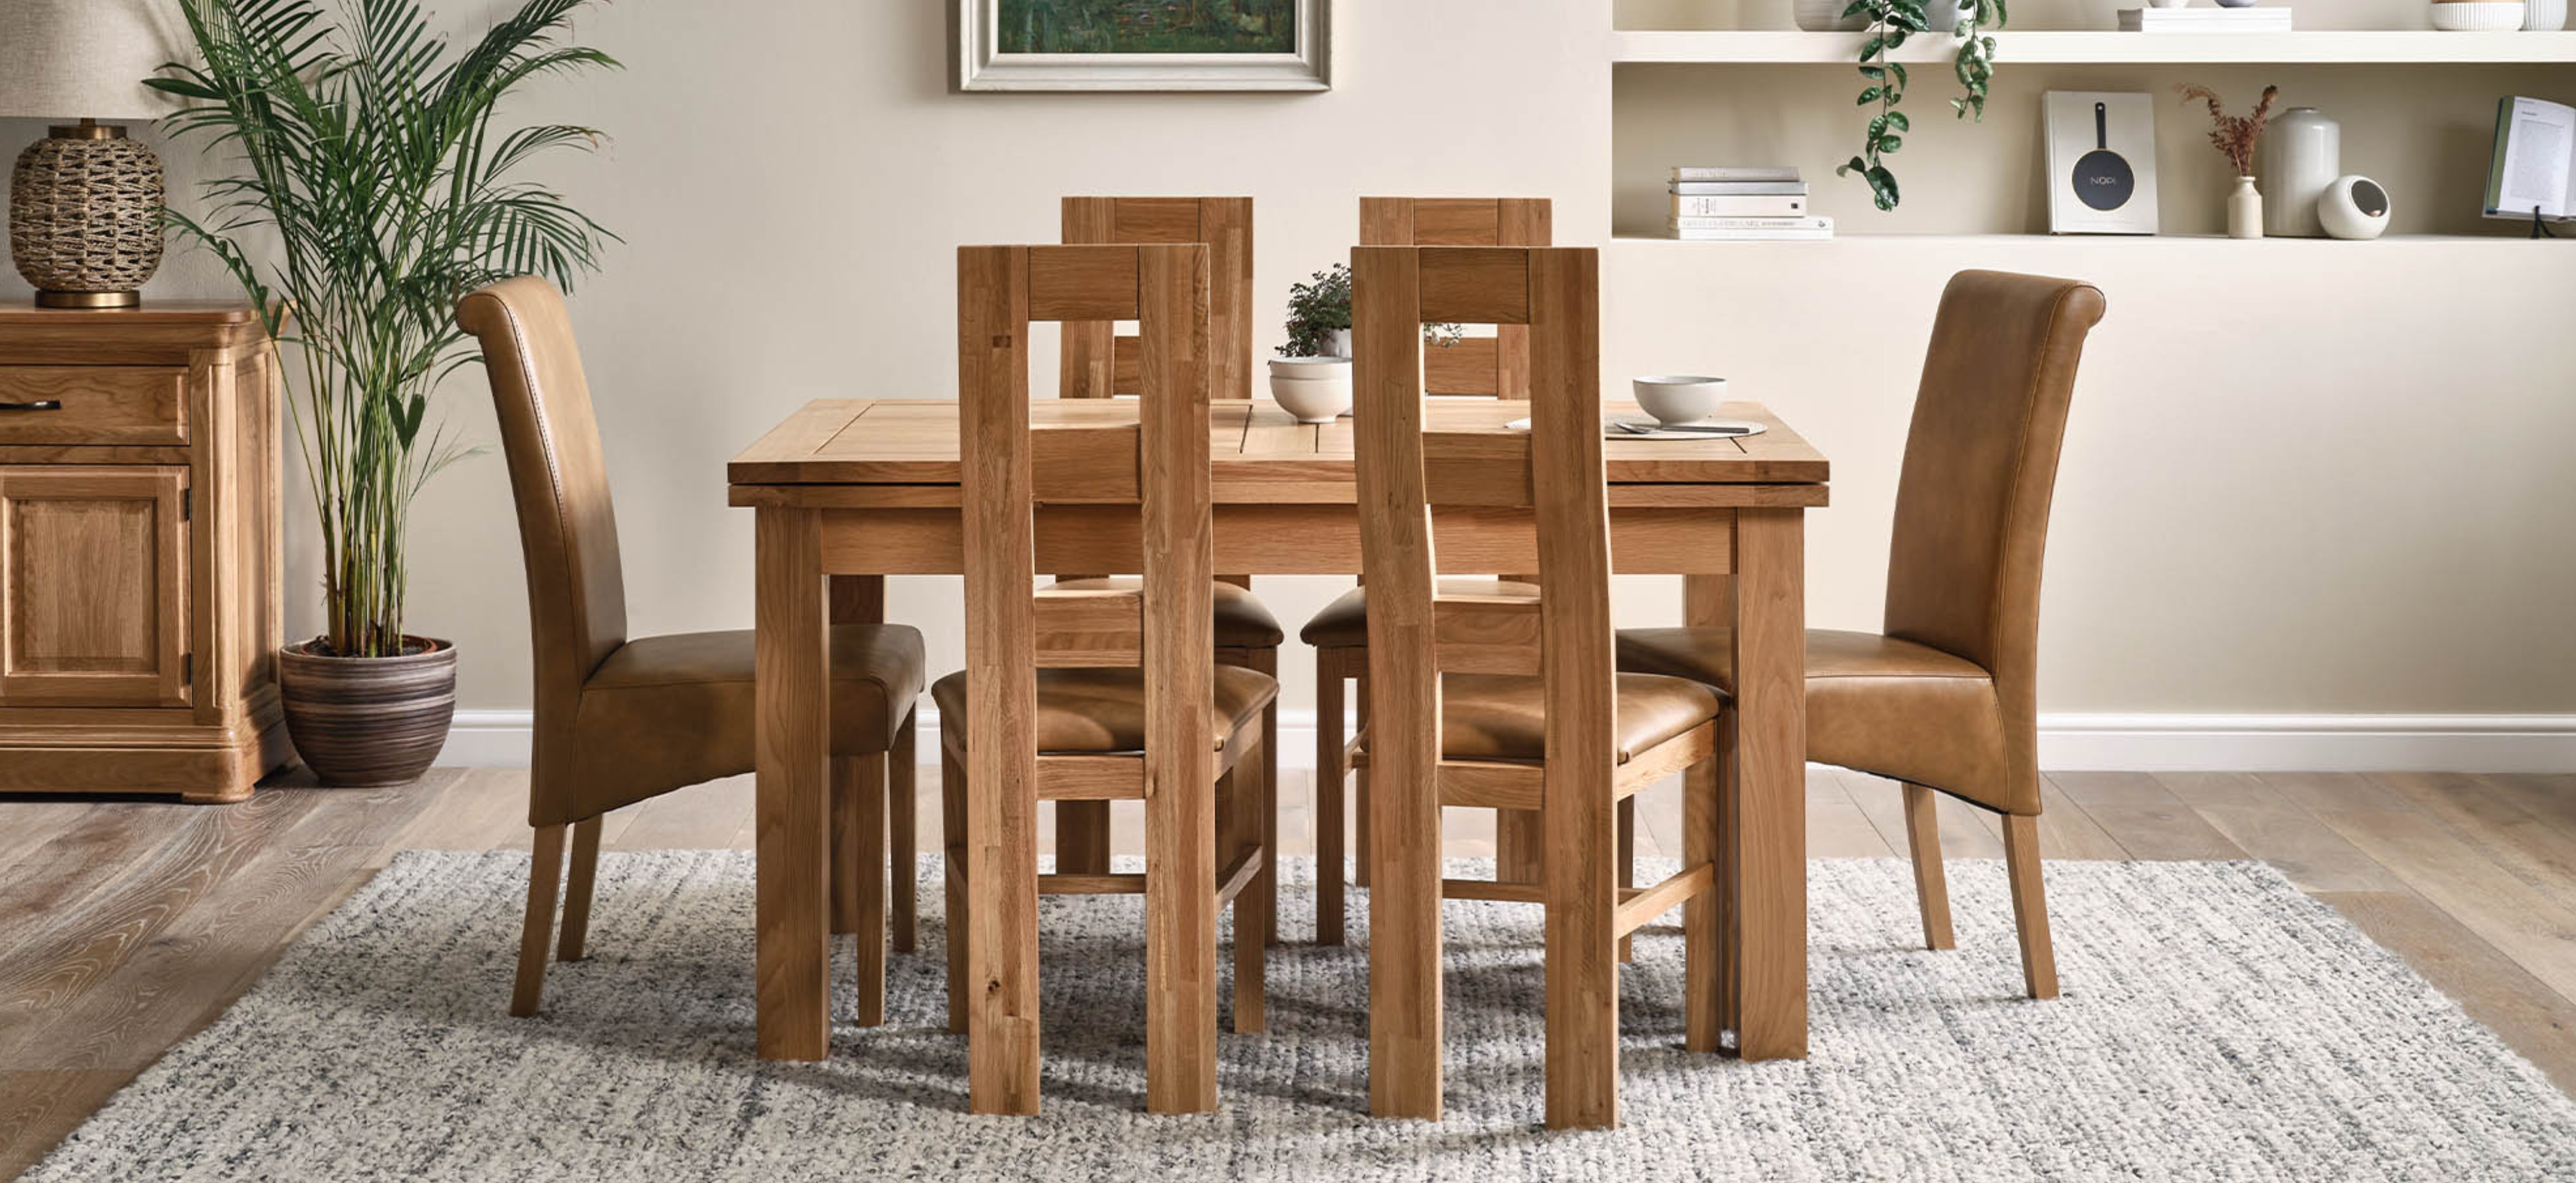 Oak furnitureland wave back chairs and oak dining table